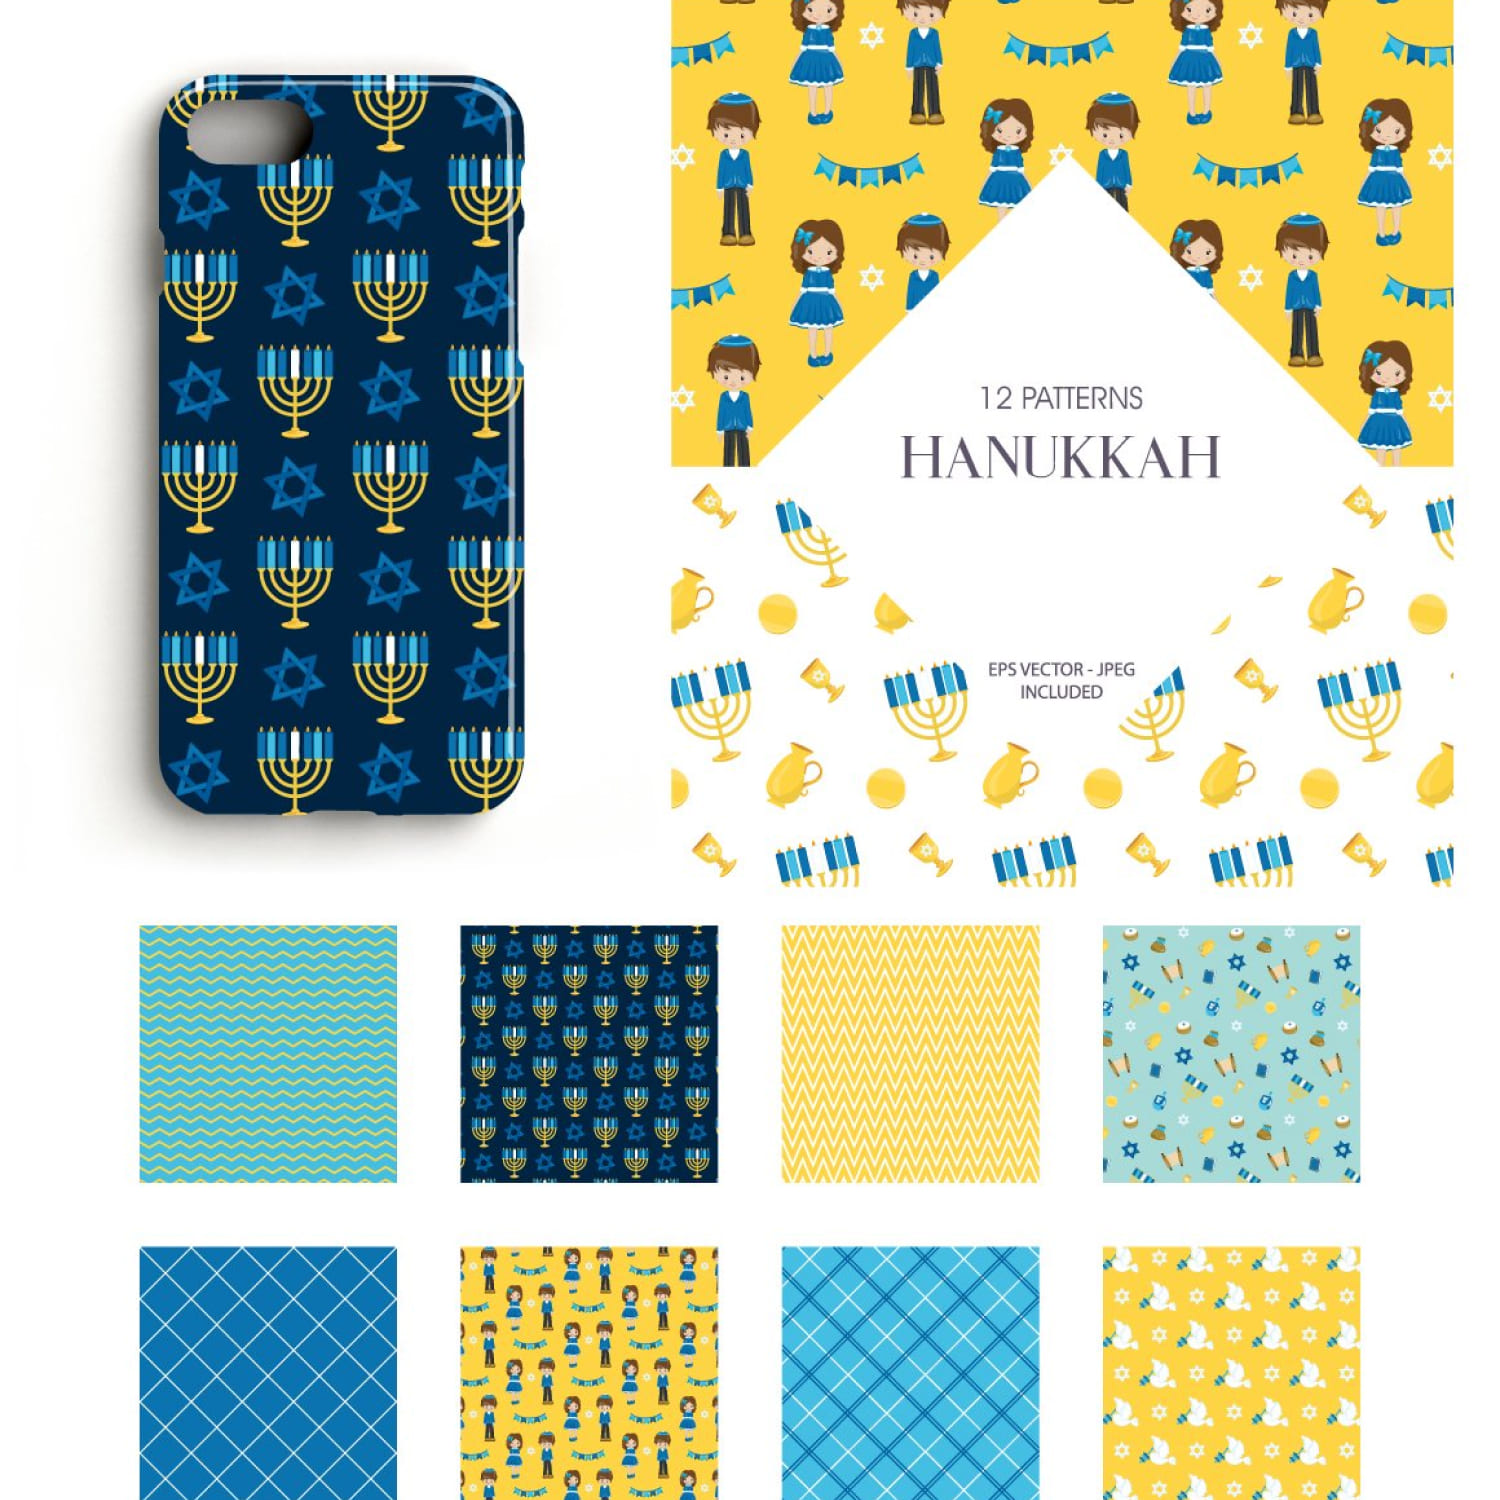 Preview hanukkah papers graphic illustration.